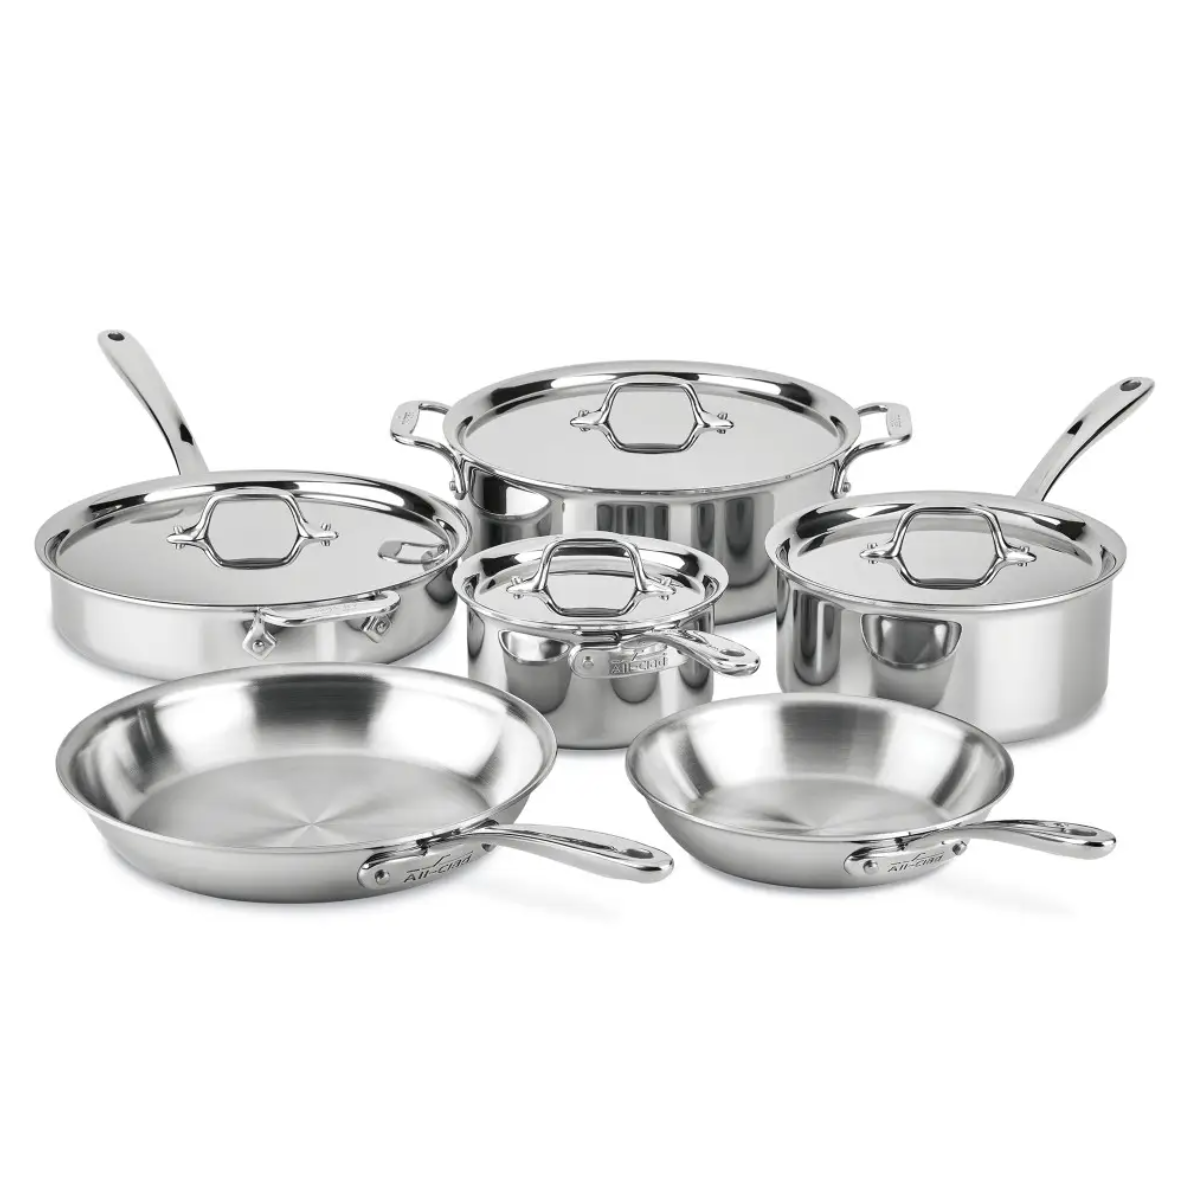 All-Clad D3 Stainless Cookware Set (10-Piece)